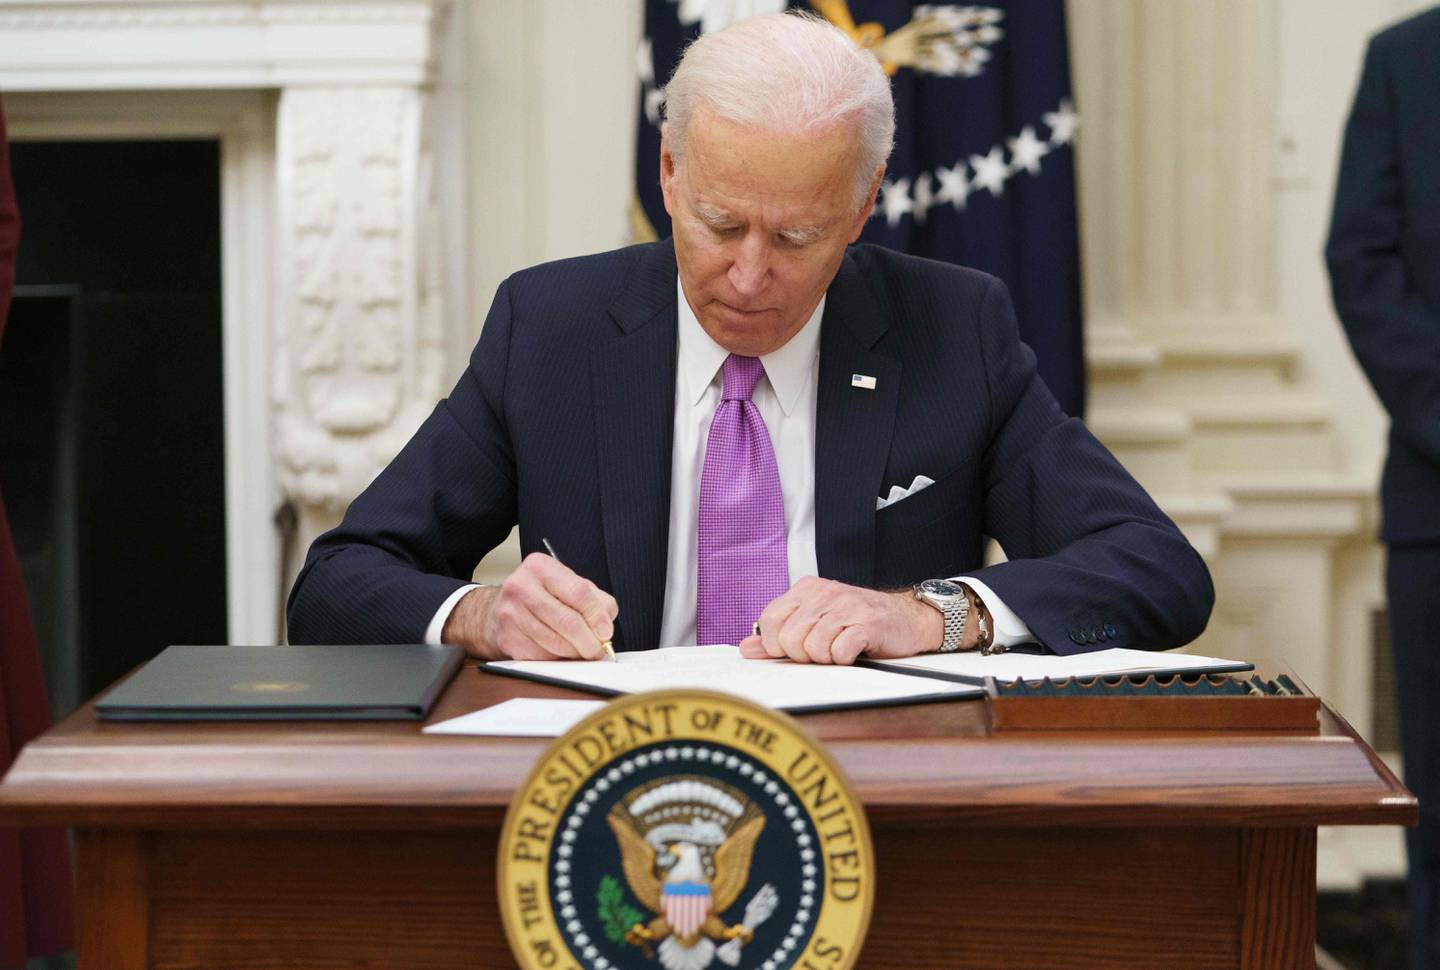 US President Joe Biden signs executive orders as part of the Covid-19 response in the State Dining Room of the White House in Washington, DC, on January 21, 2021. (Photo by MANDEL NGAN / AFP)